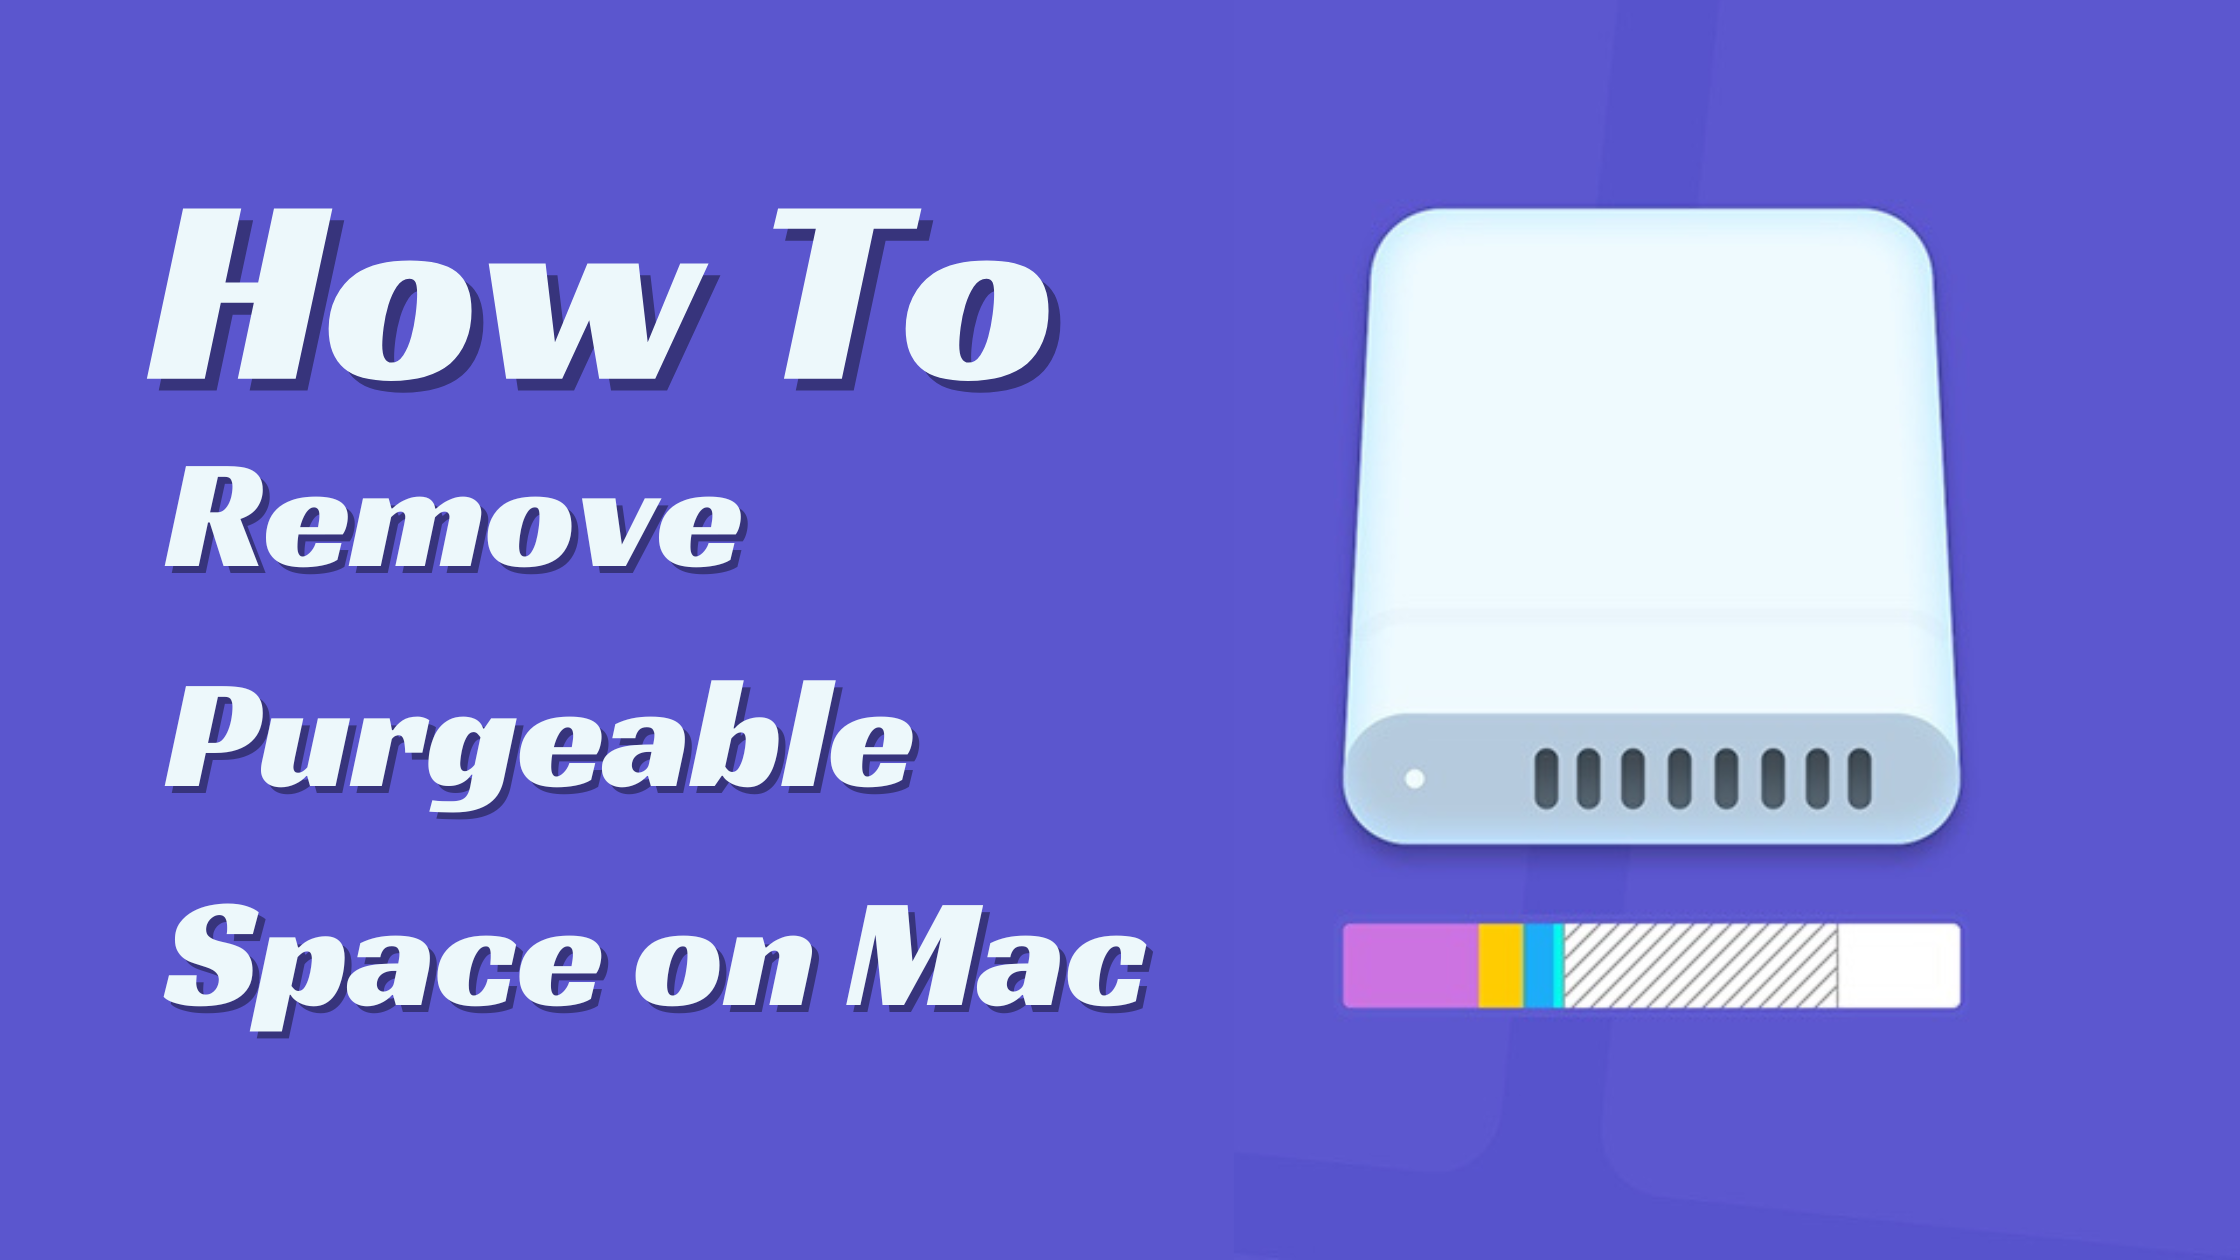 How can you remove purgeable space on Mac?